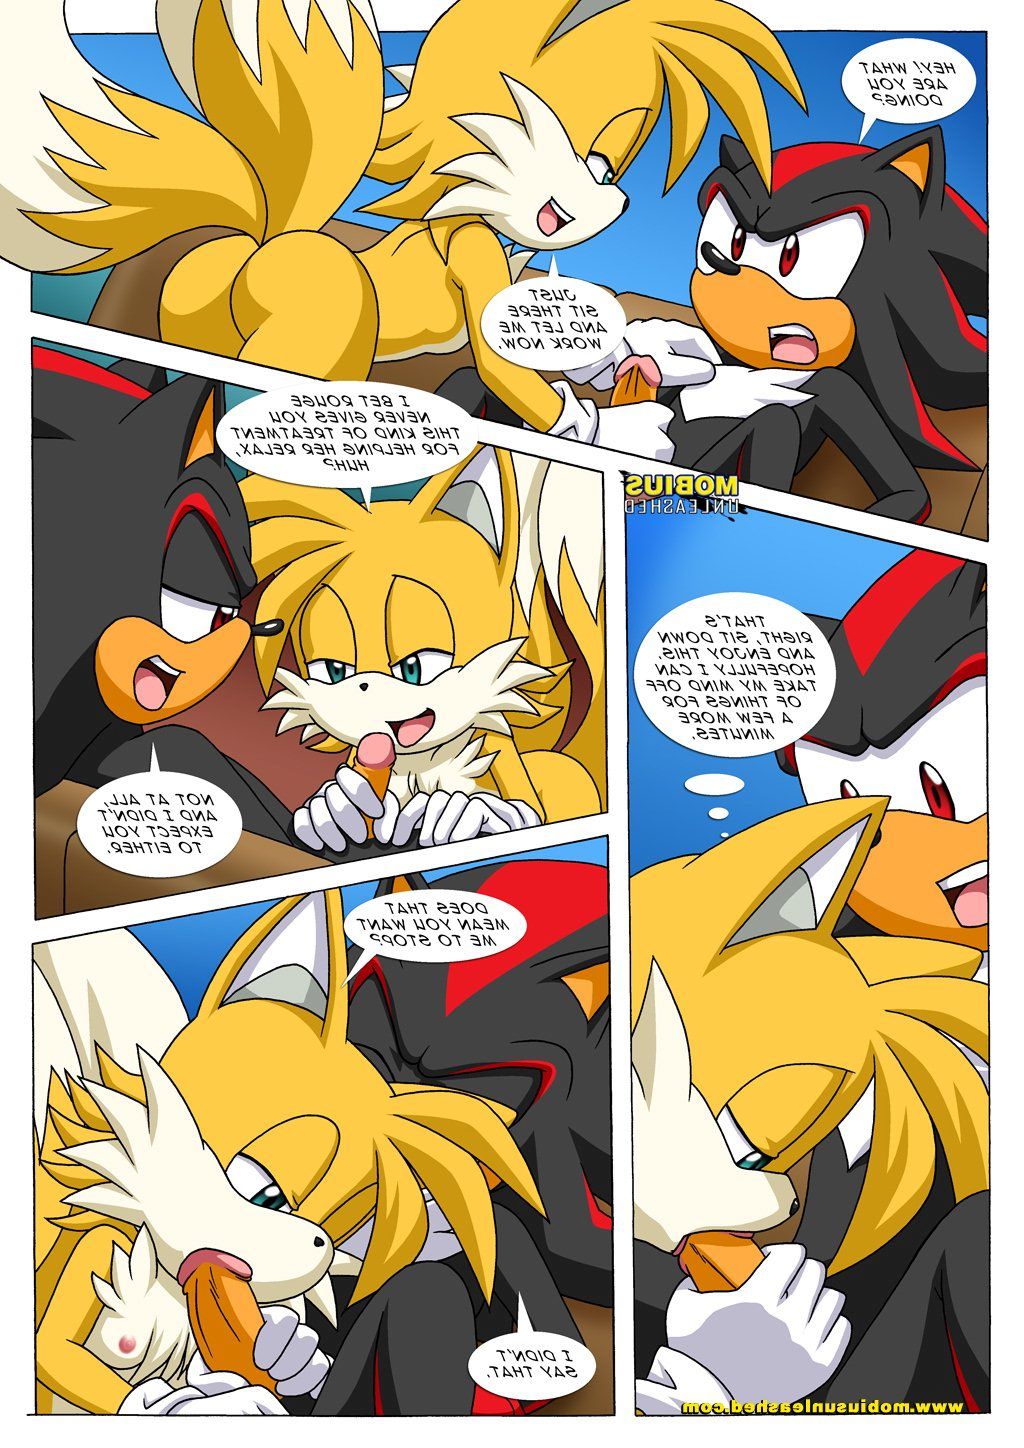 tails-tales-2 image_13441.jpg